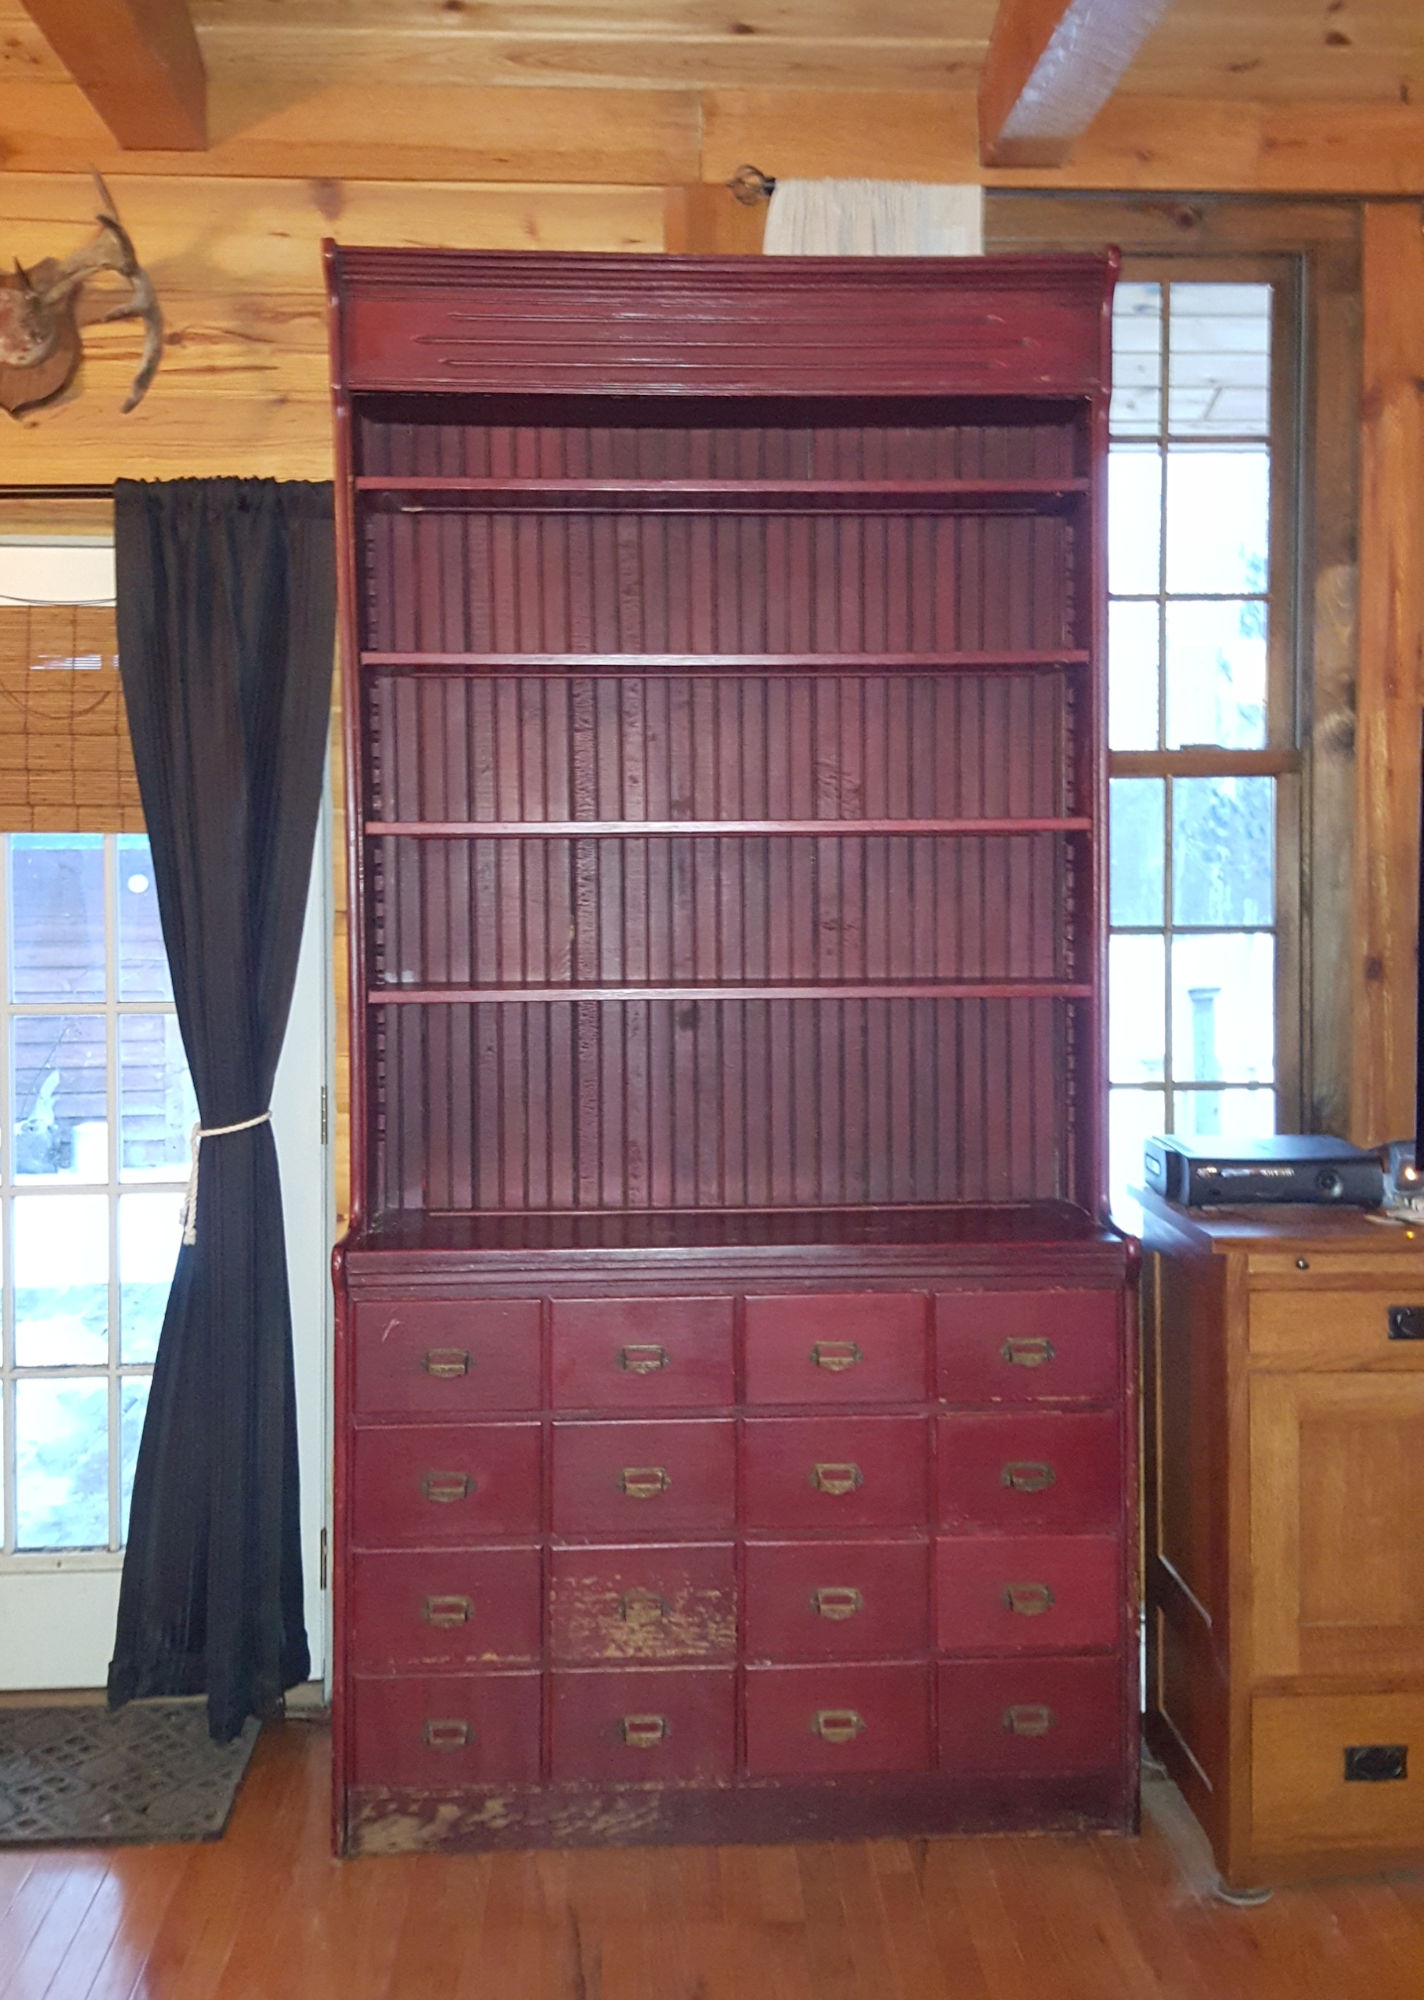 Pharmacy apothecary 19th c.
                                        cabinet with bookcase storage